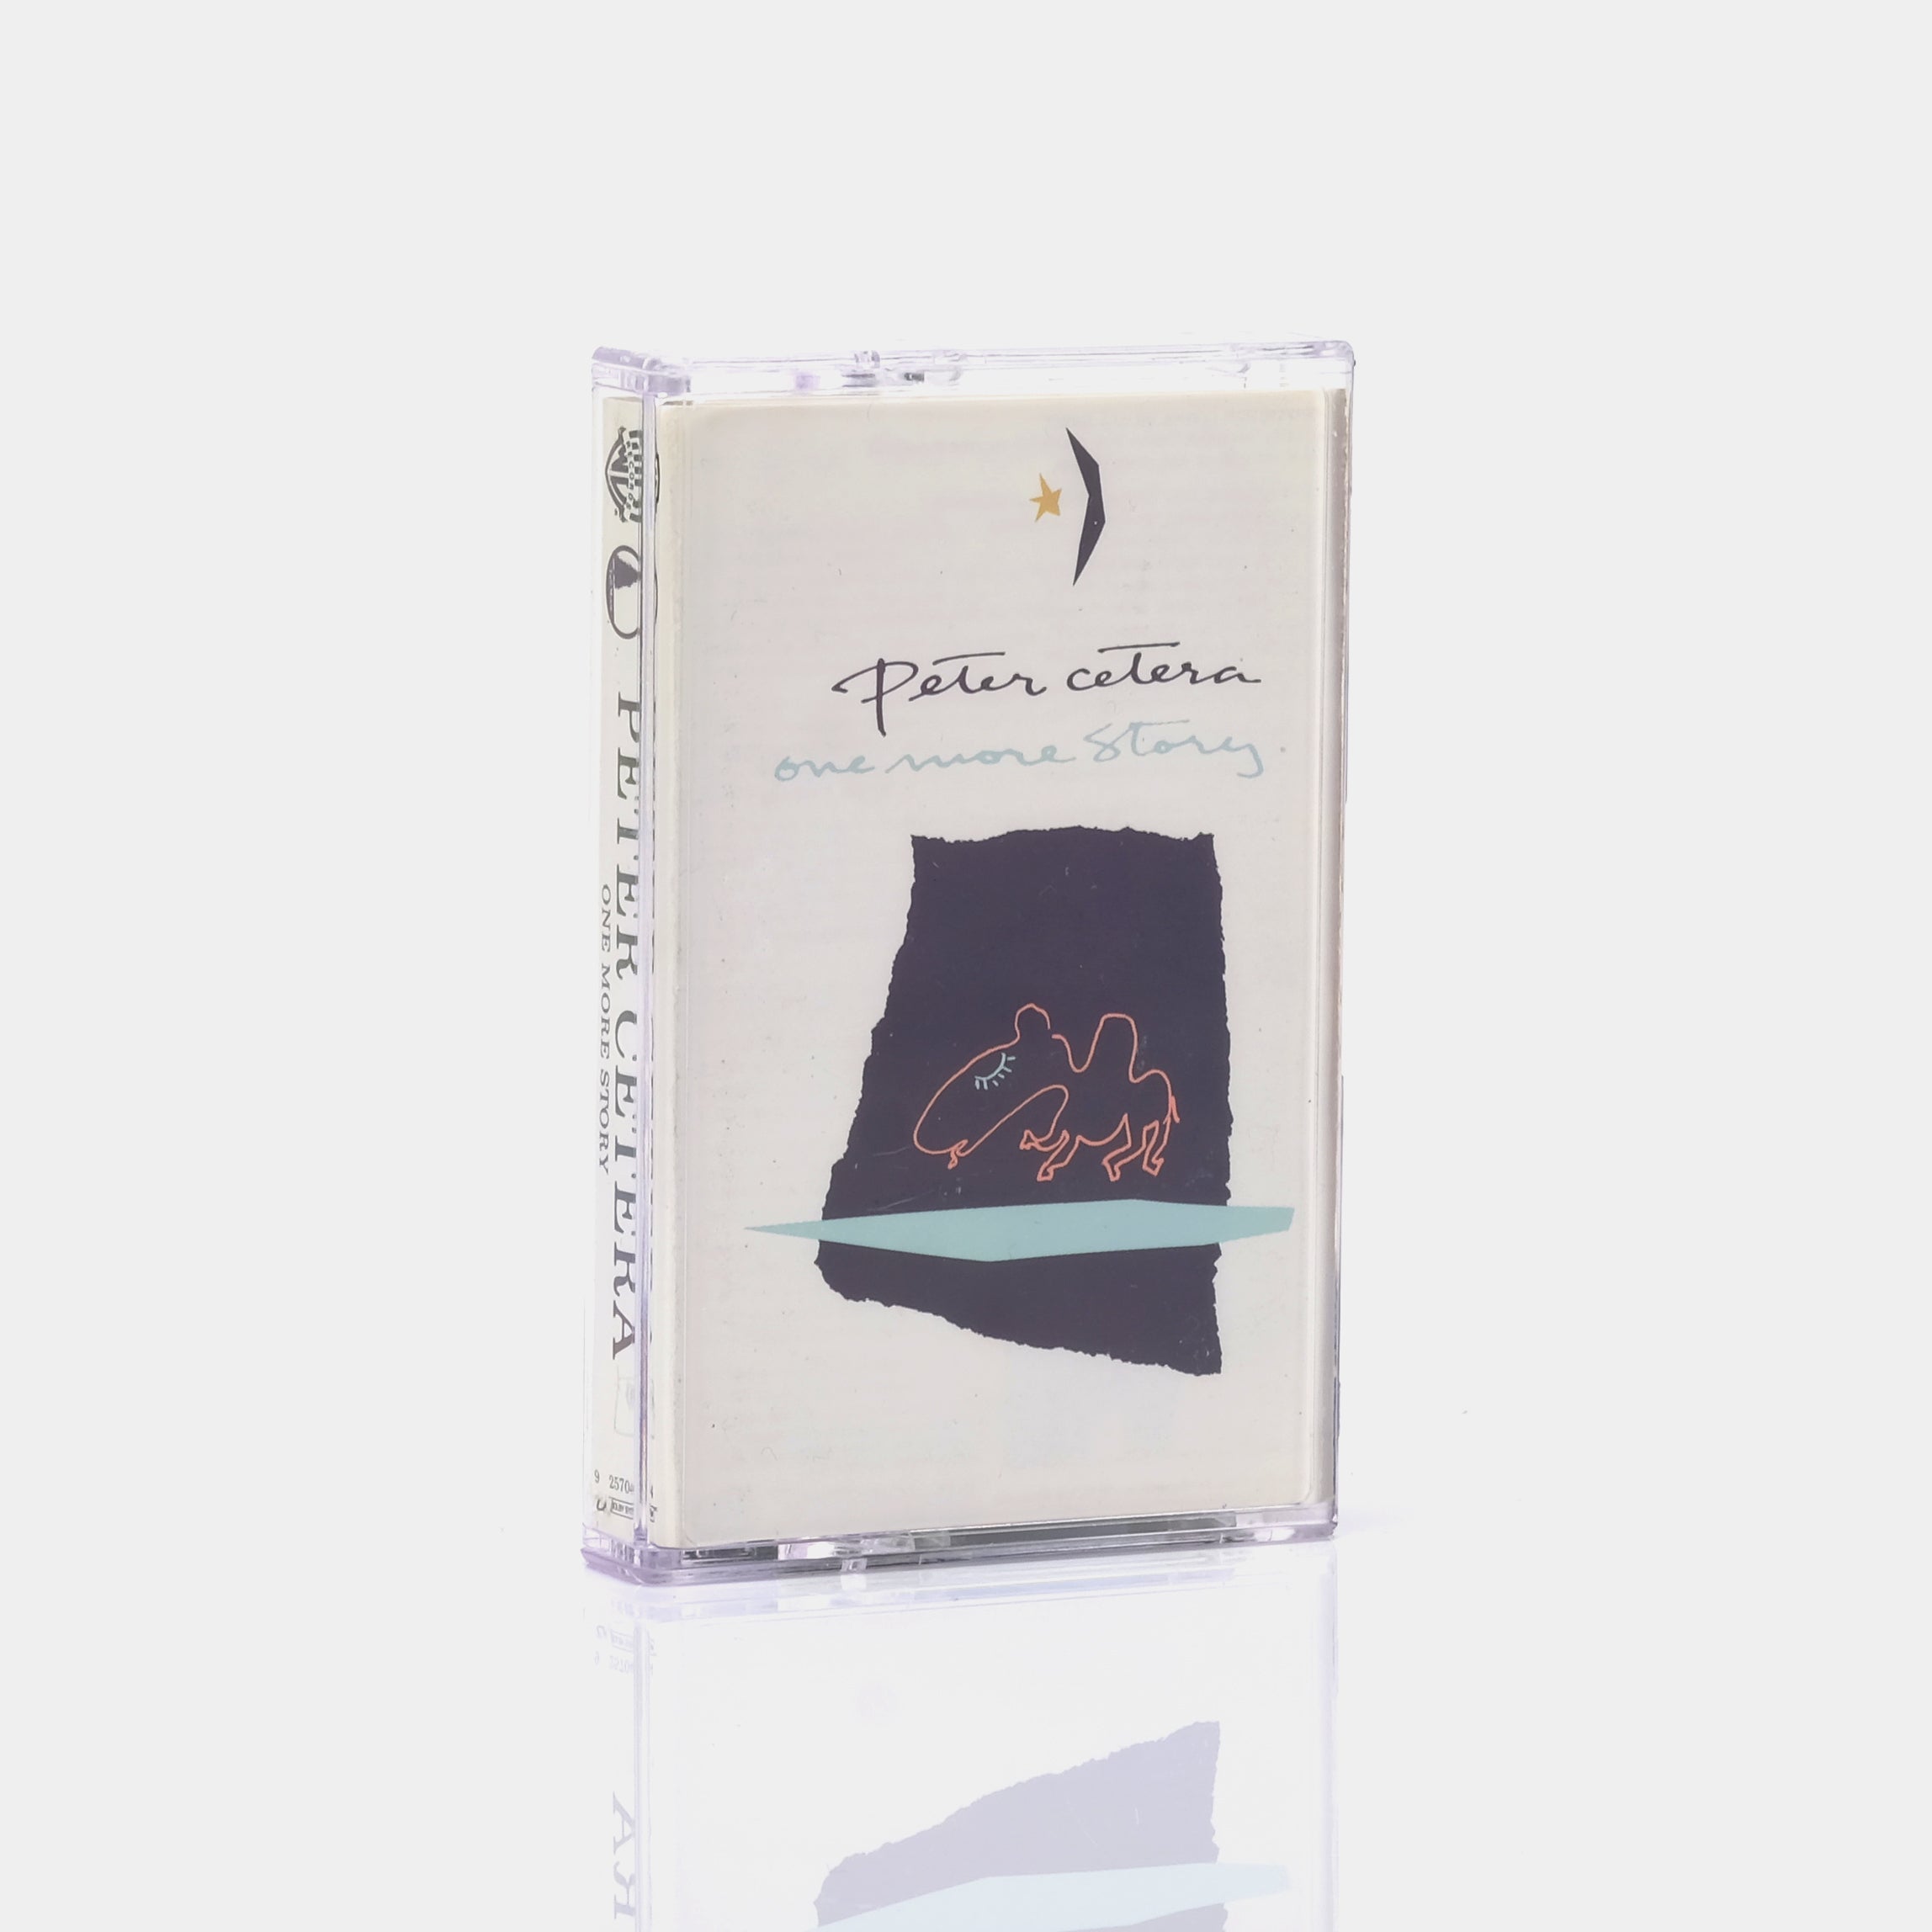 Peter Cetera - One More Story Cassette Tape